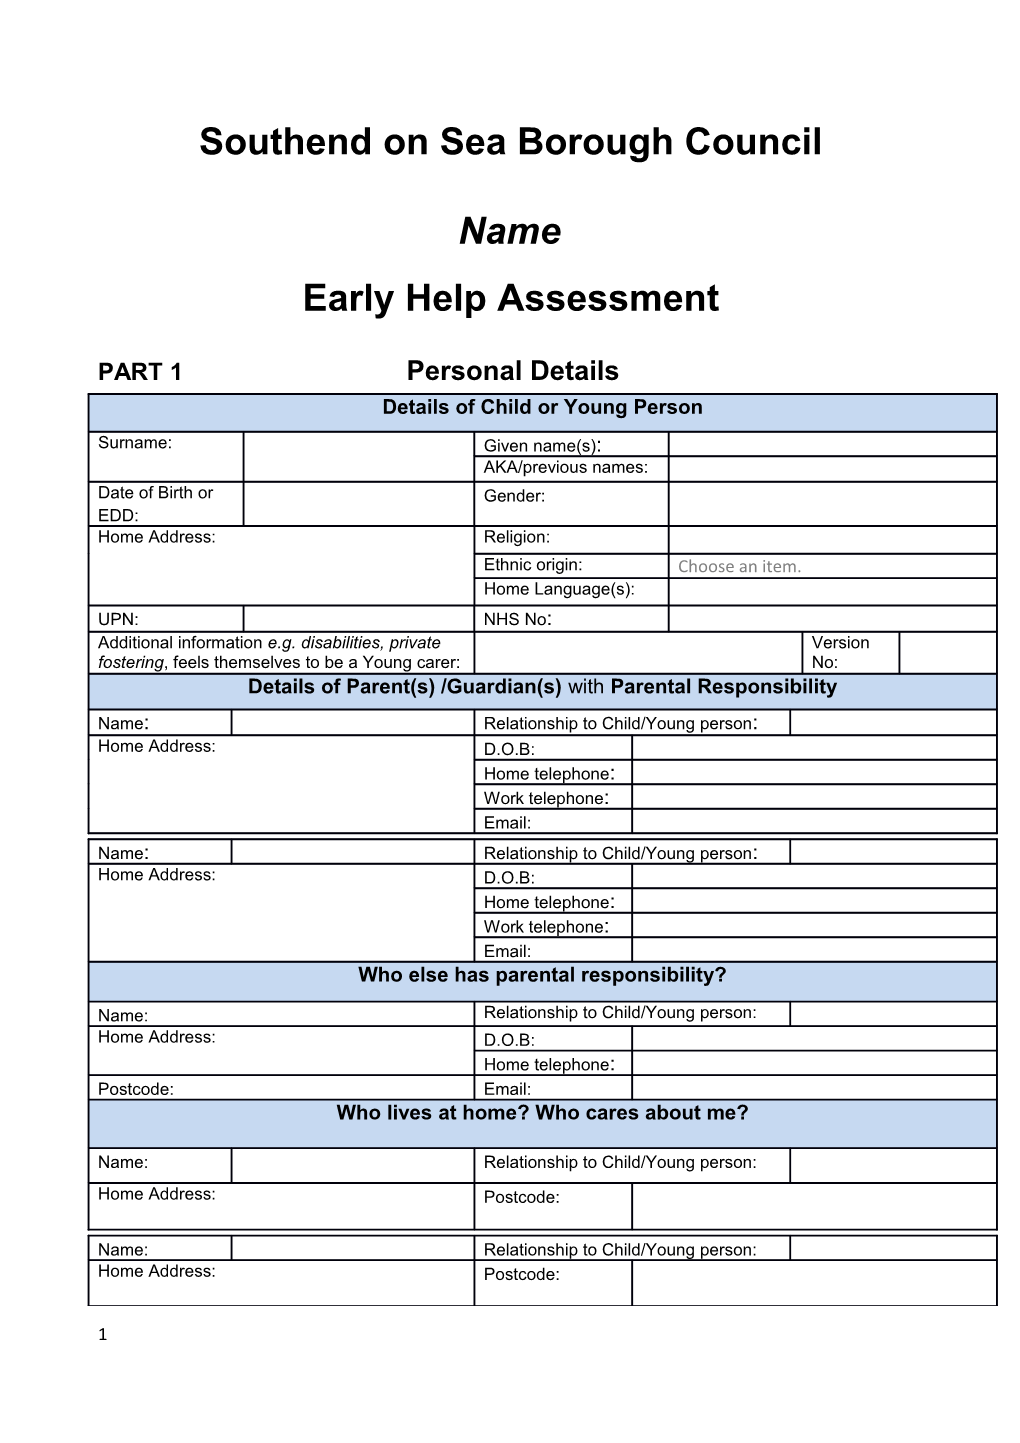 Early Help Assessment s1